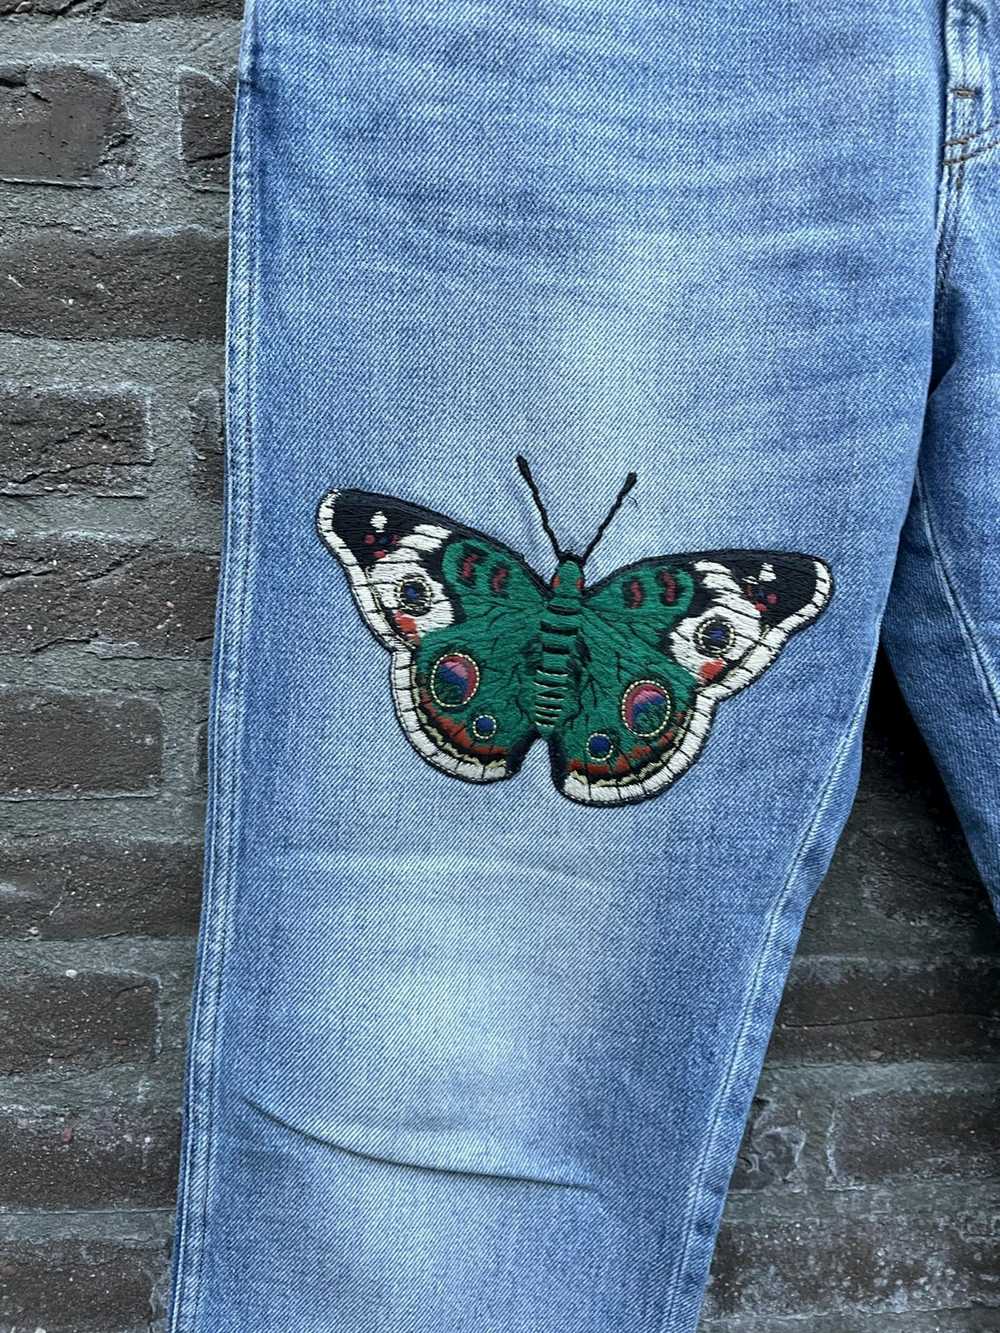 Gucci Butterfly Embroidered Jeans - image 5